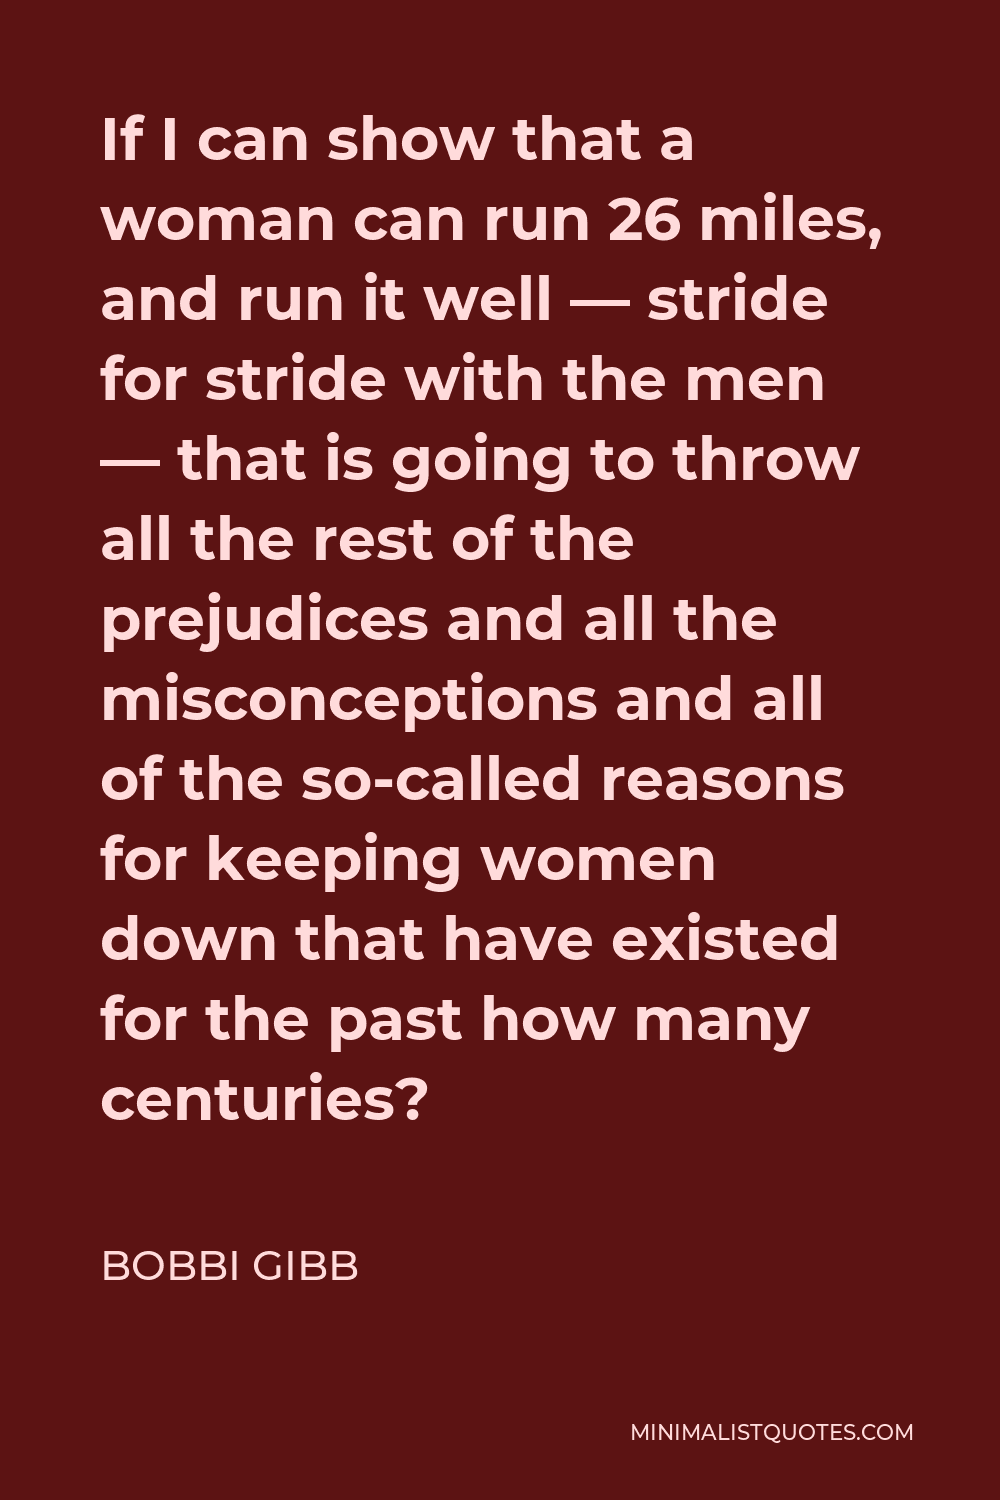 Bobbi Gibb Quote - If I can show that a woman can run 26 miles, and run it well — stride for stride with the men — that is going to throw all the rest of the prejudices and all the misconceptions and all of the so-called reasons for keeping women down that have existed for the past how many centuries?